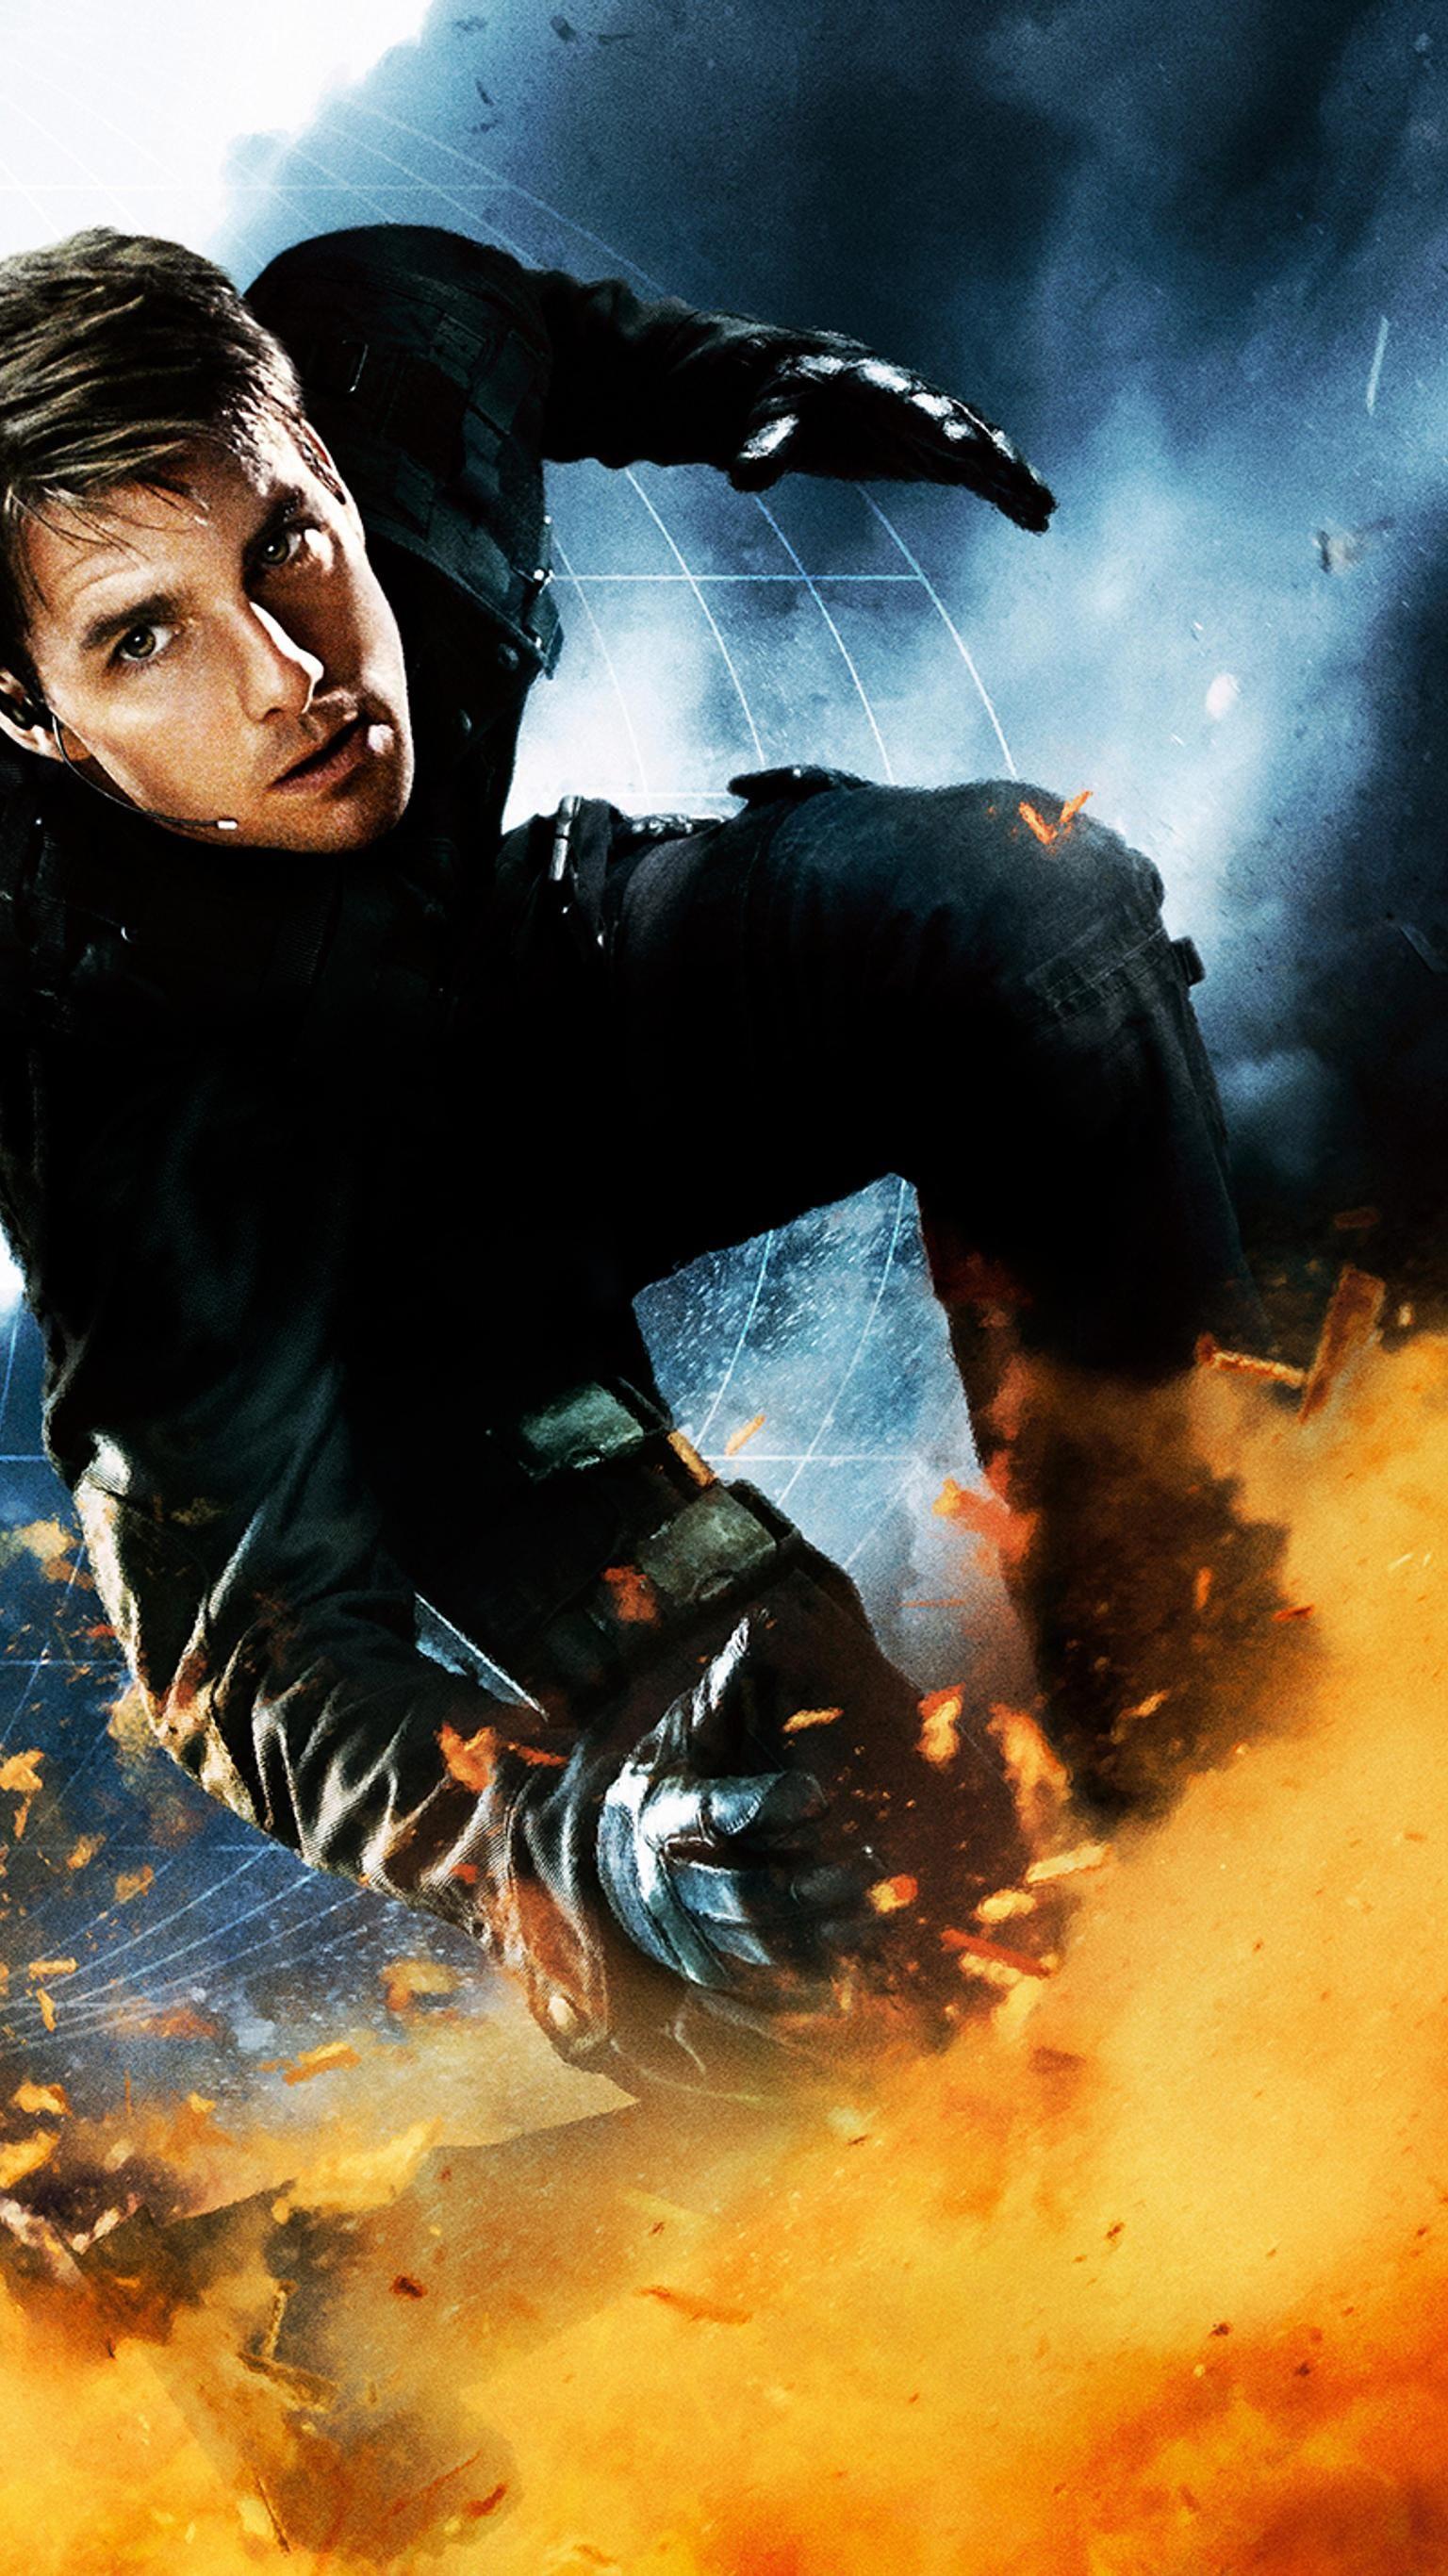 Mission: Impossible III (2006) Phone Wallpaper. Moviemania. Tom cruise mission impossible, Tom cruise movies, Mission impossible movie